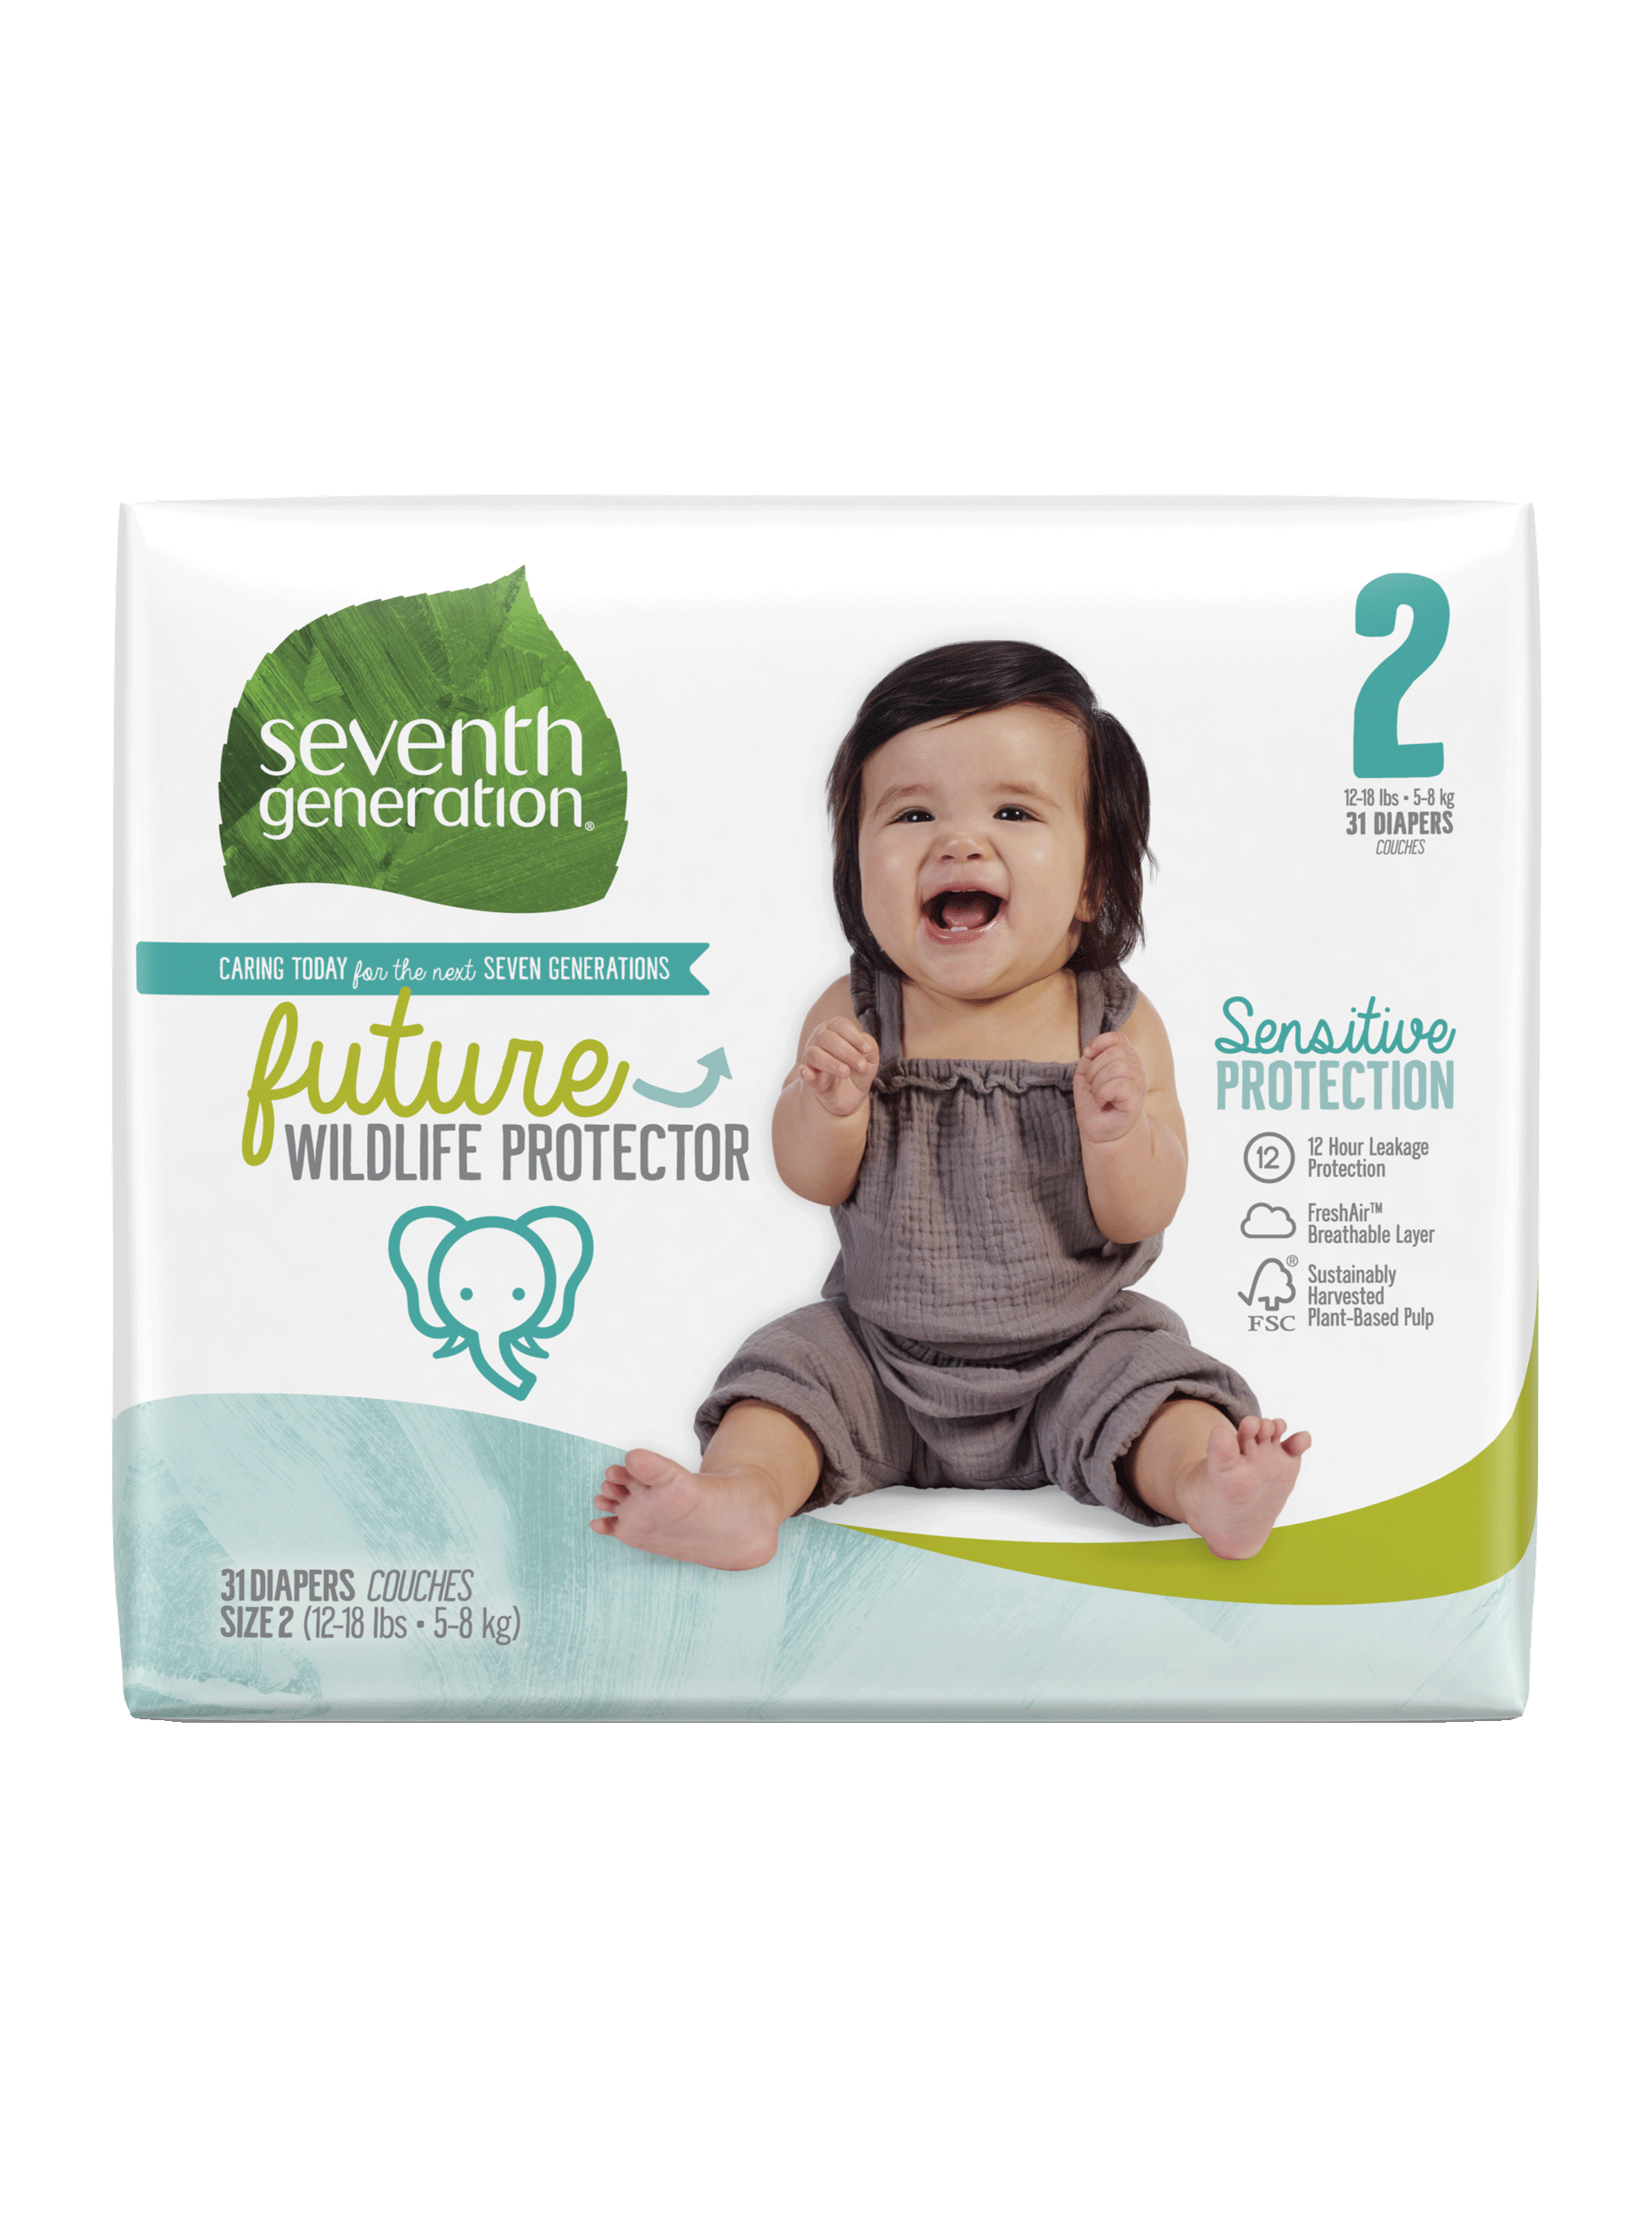 pampers seventh generation